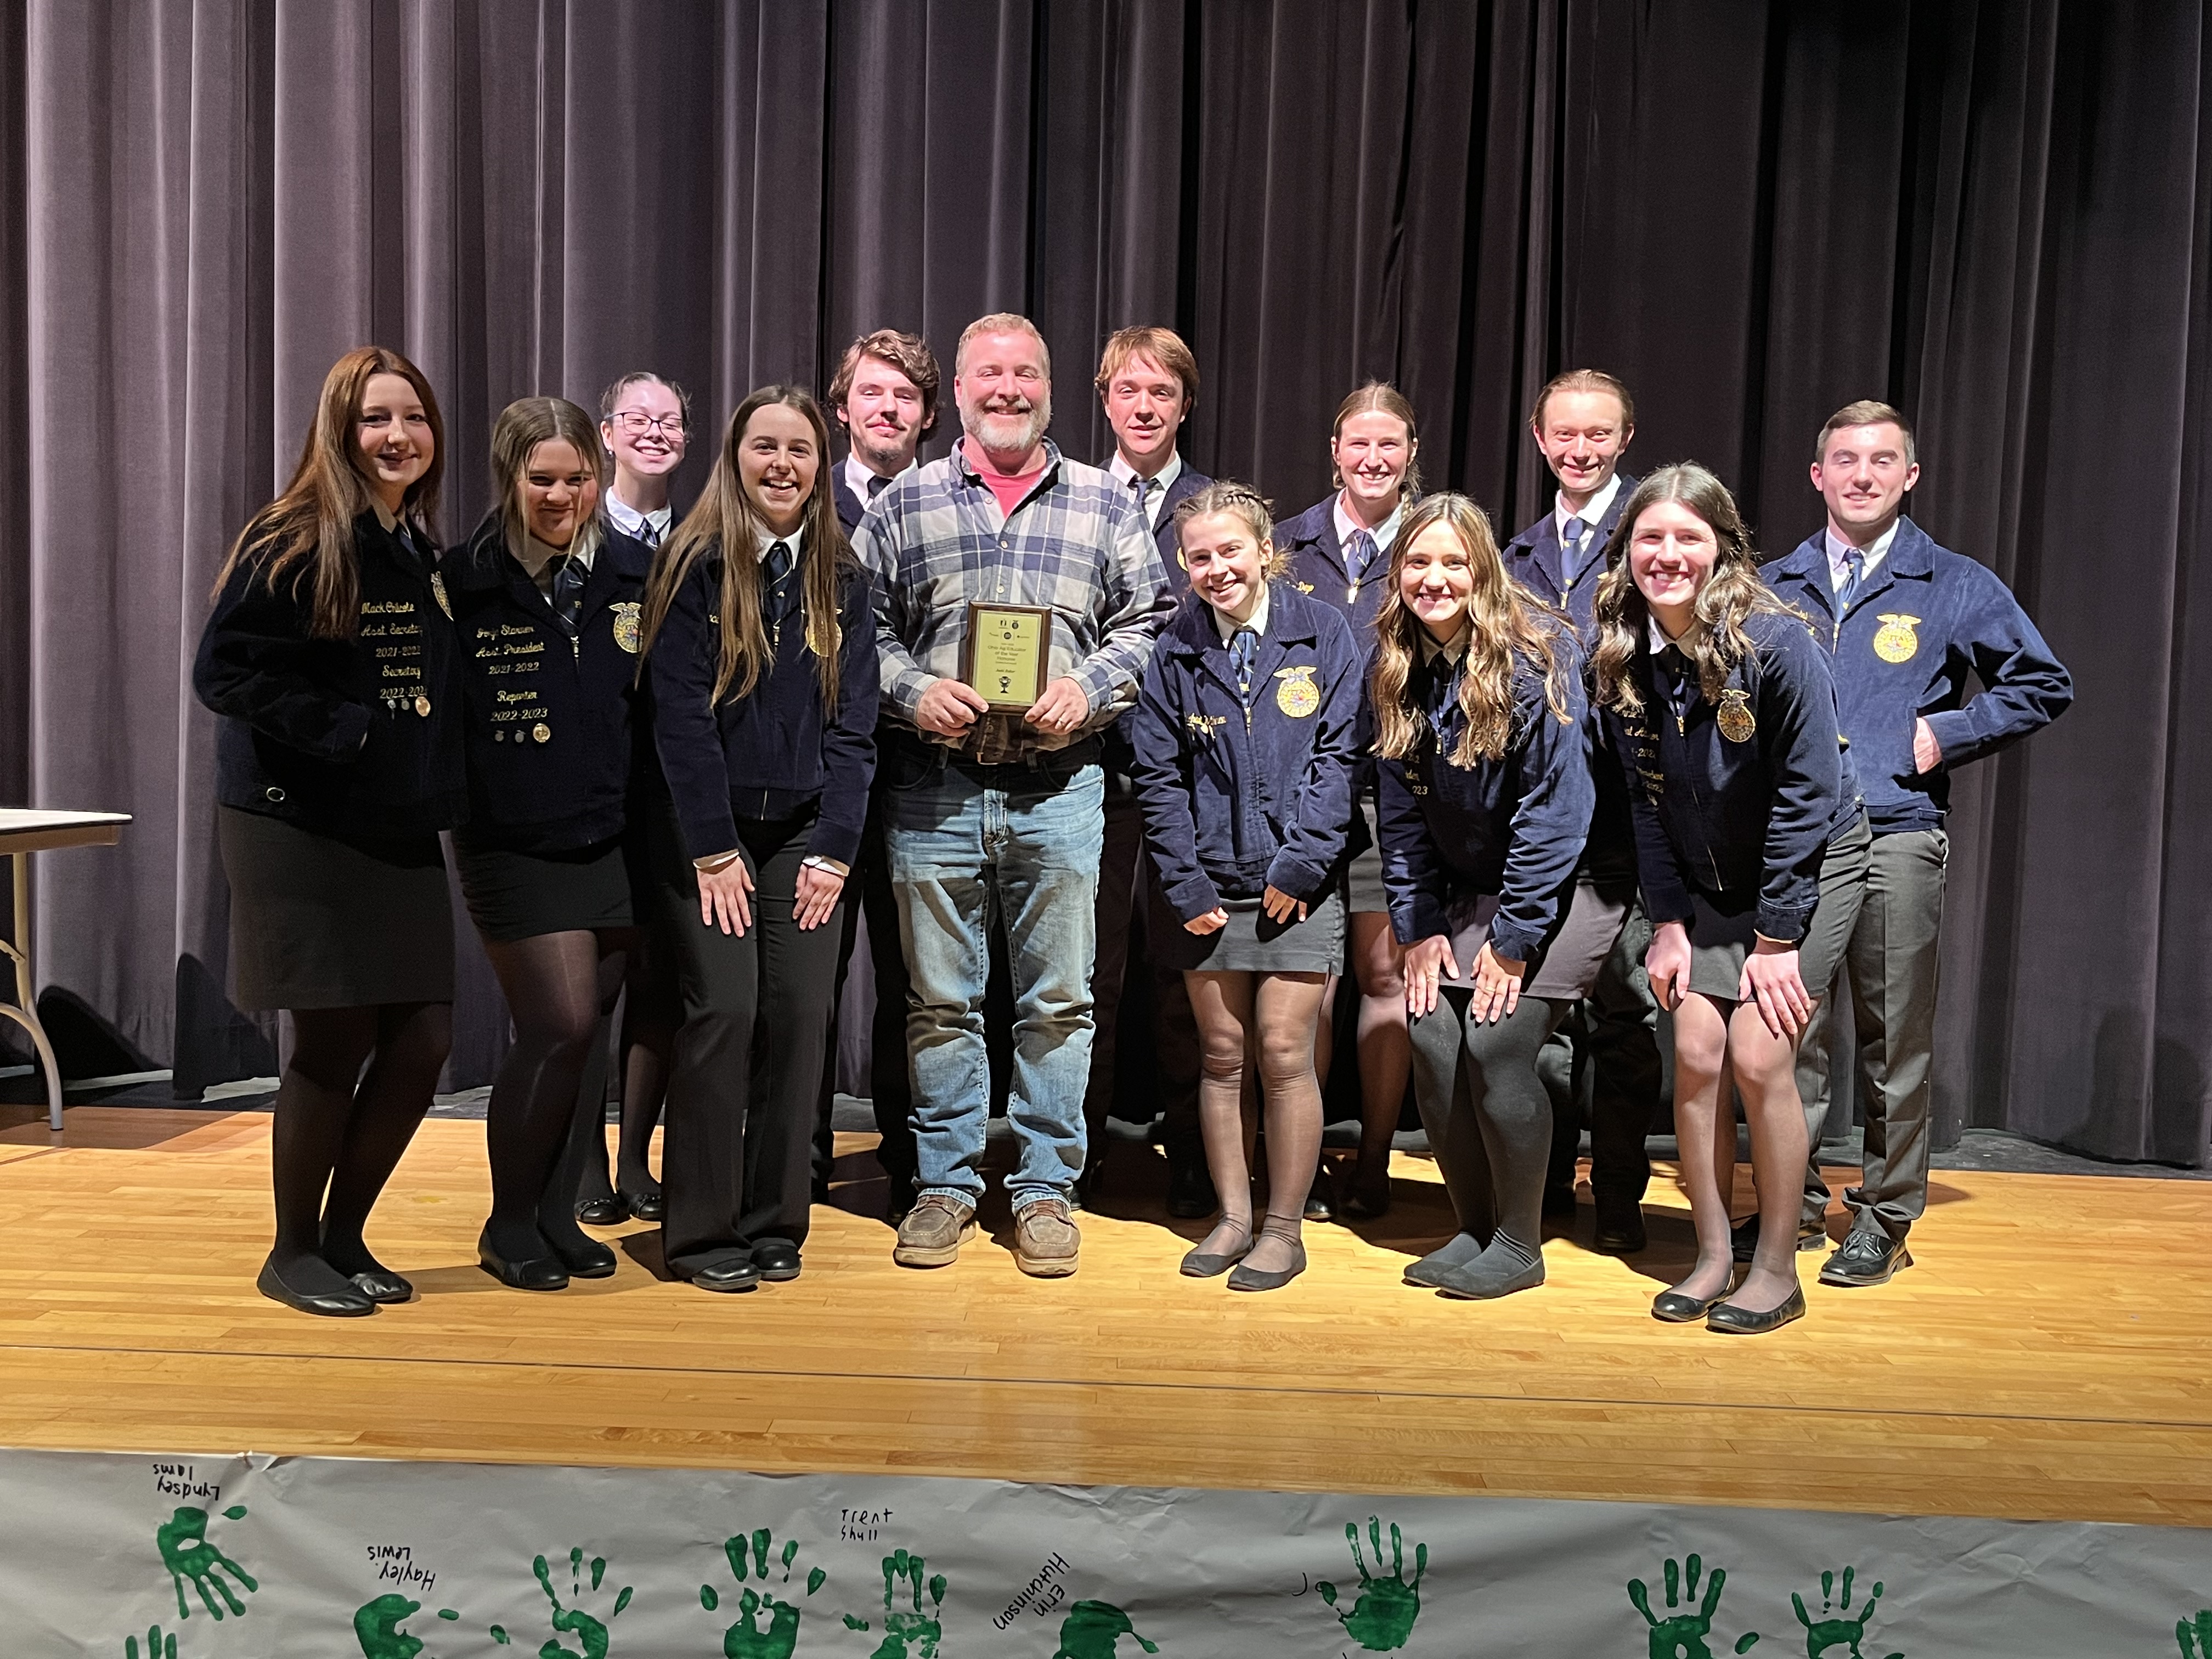 Judd Baker pictured with FFA Members